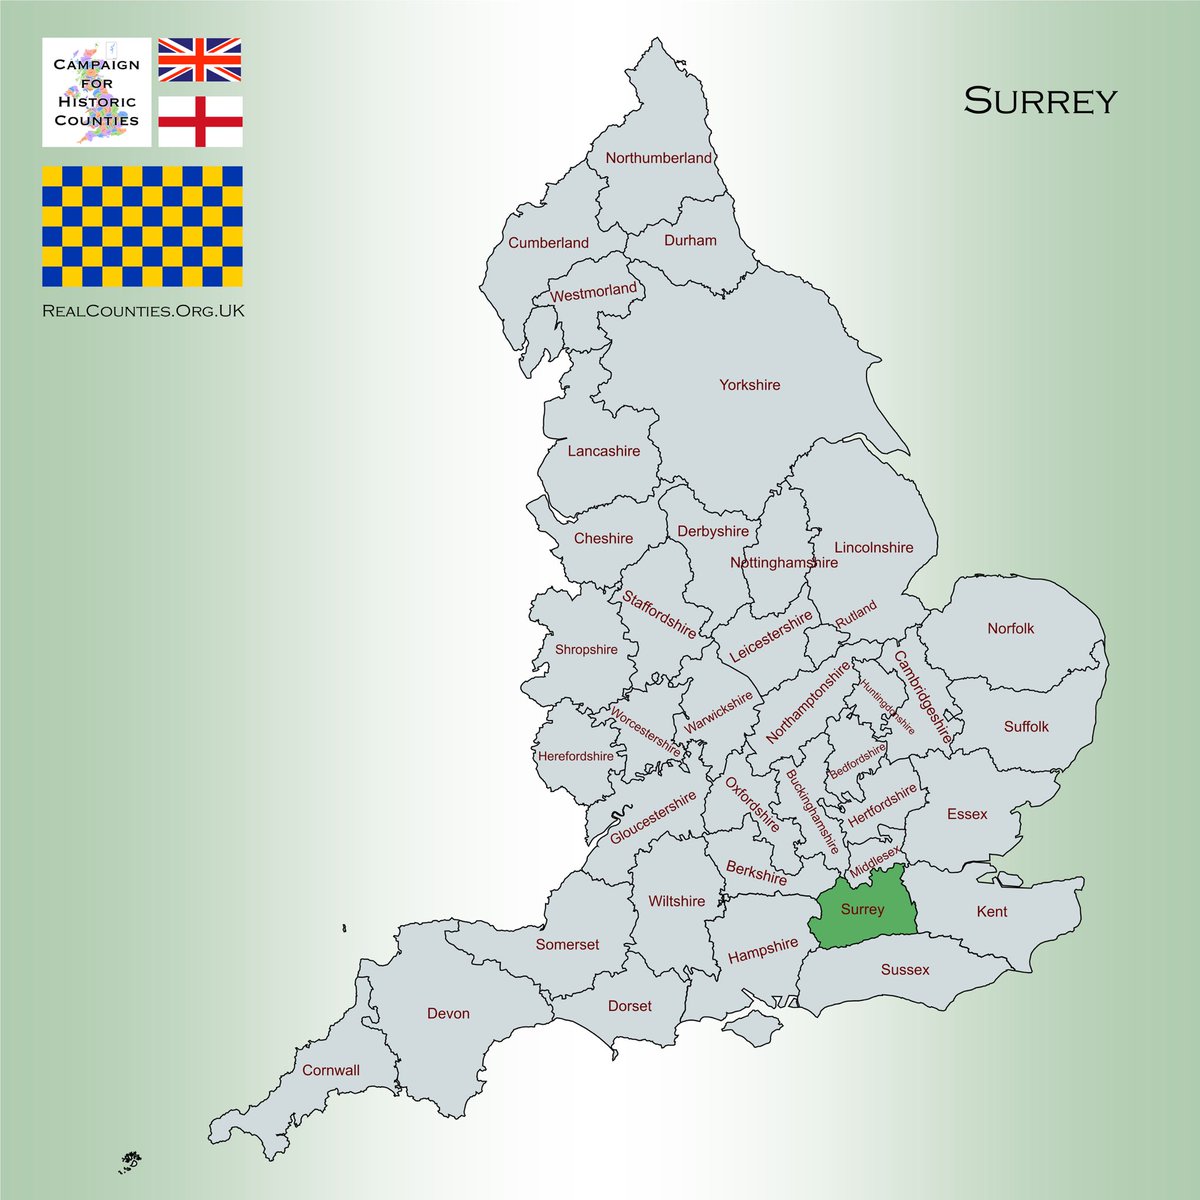 The County of #Surrey is a shire in south-east Great Britain.

Surrey's northern border is the #RiverThames.

Across the Thames lies Middlesex for the most part and Buckinghamshire to the north-west.

Its southern border is with Sussex.

🇬🇧 #HistoricCounties | #RealCounties 🏴󠁧󠁢󠁥󠁮󠁧󠁿